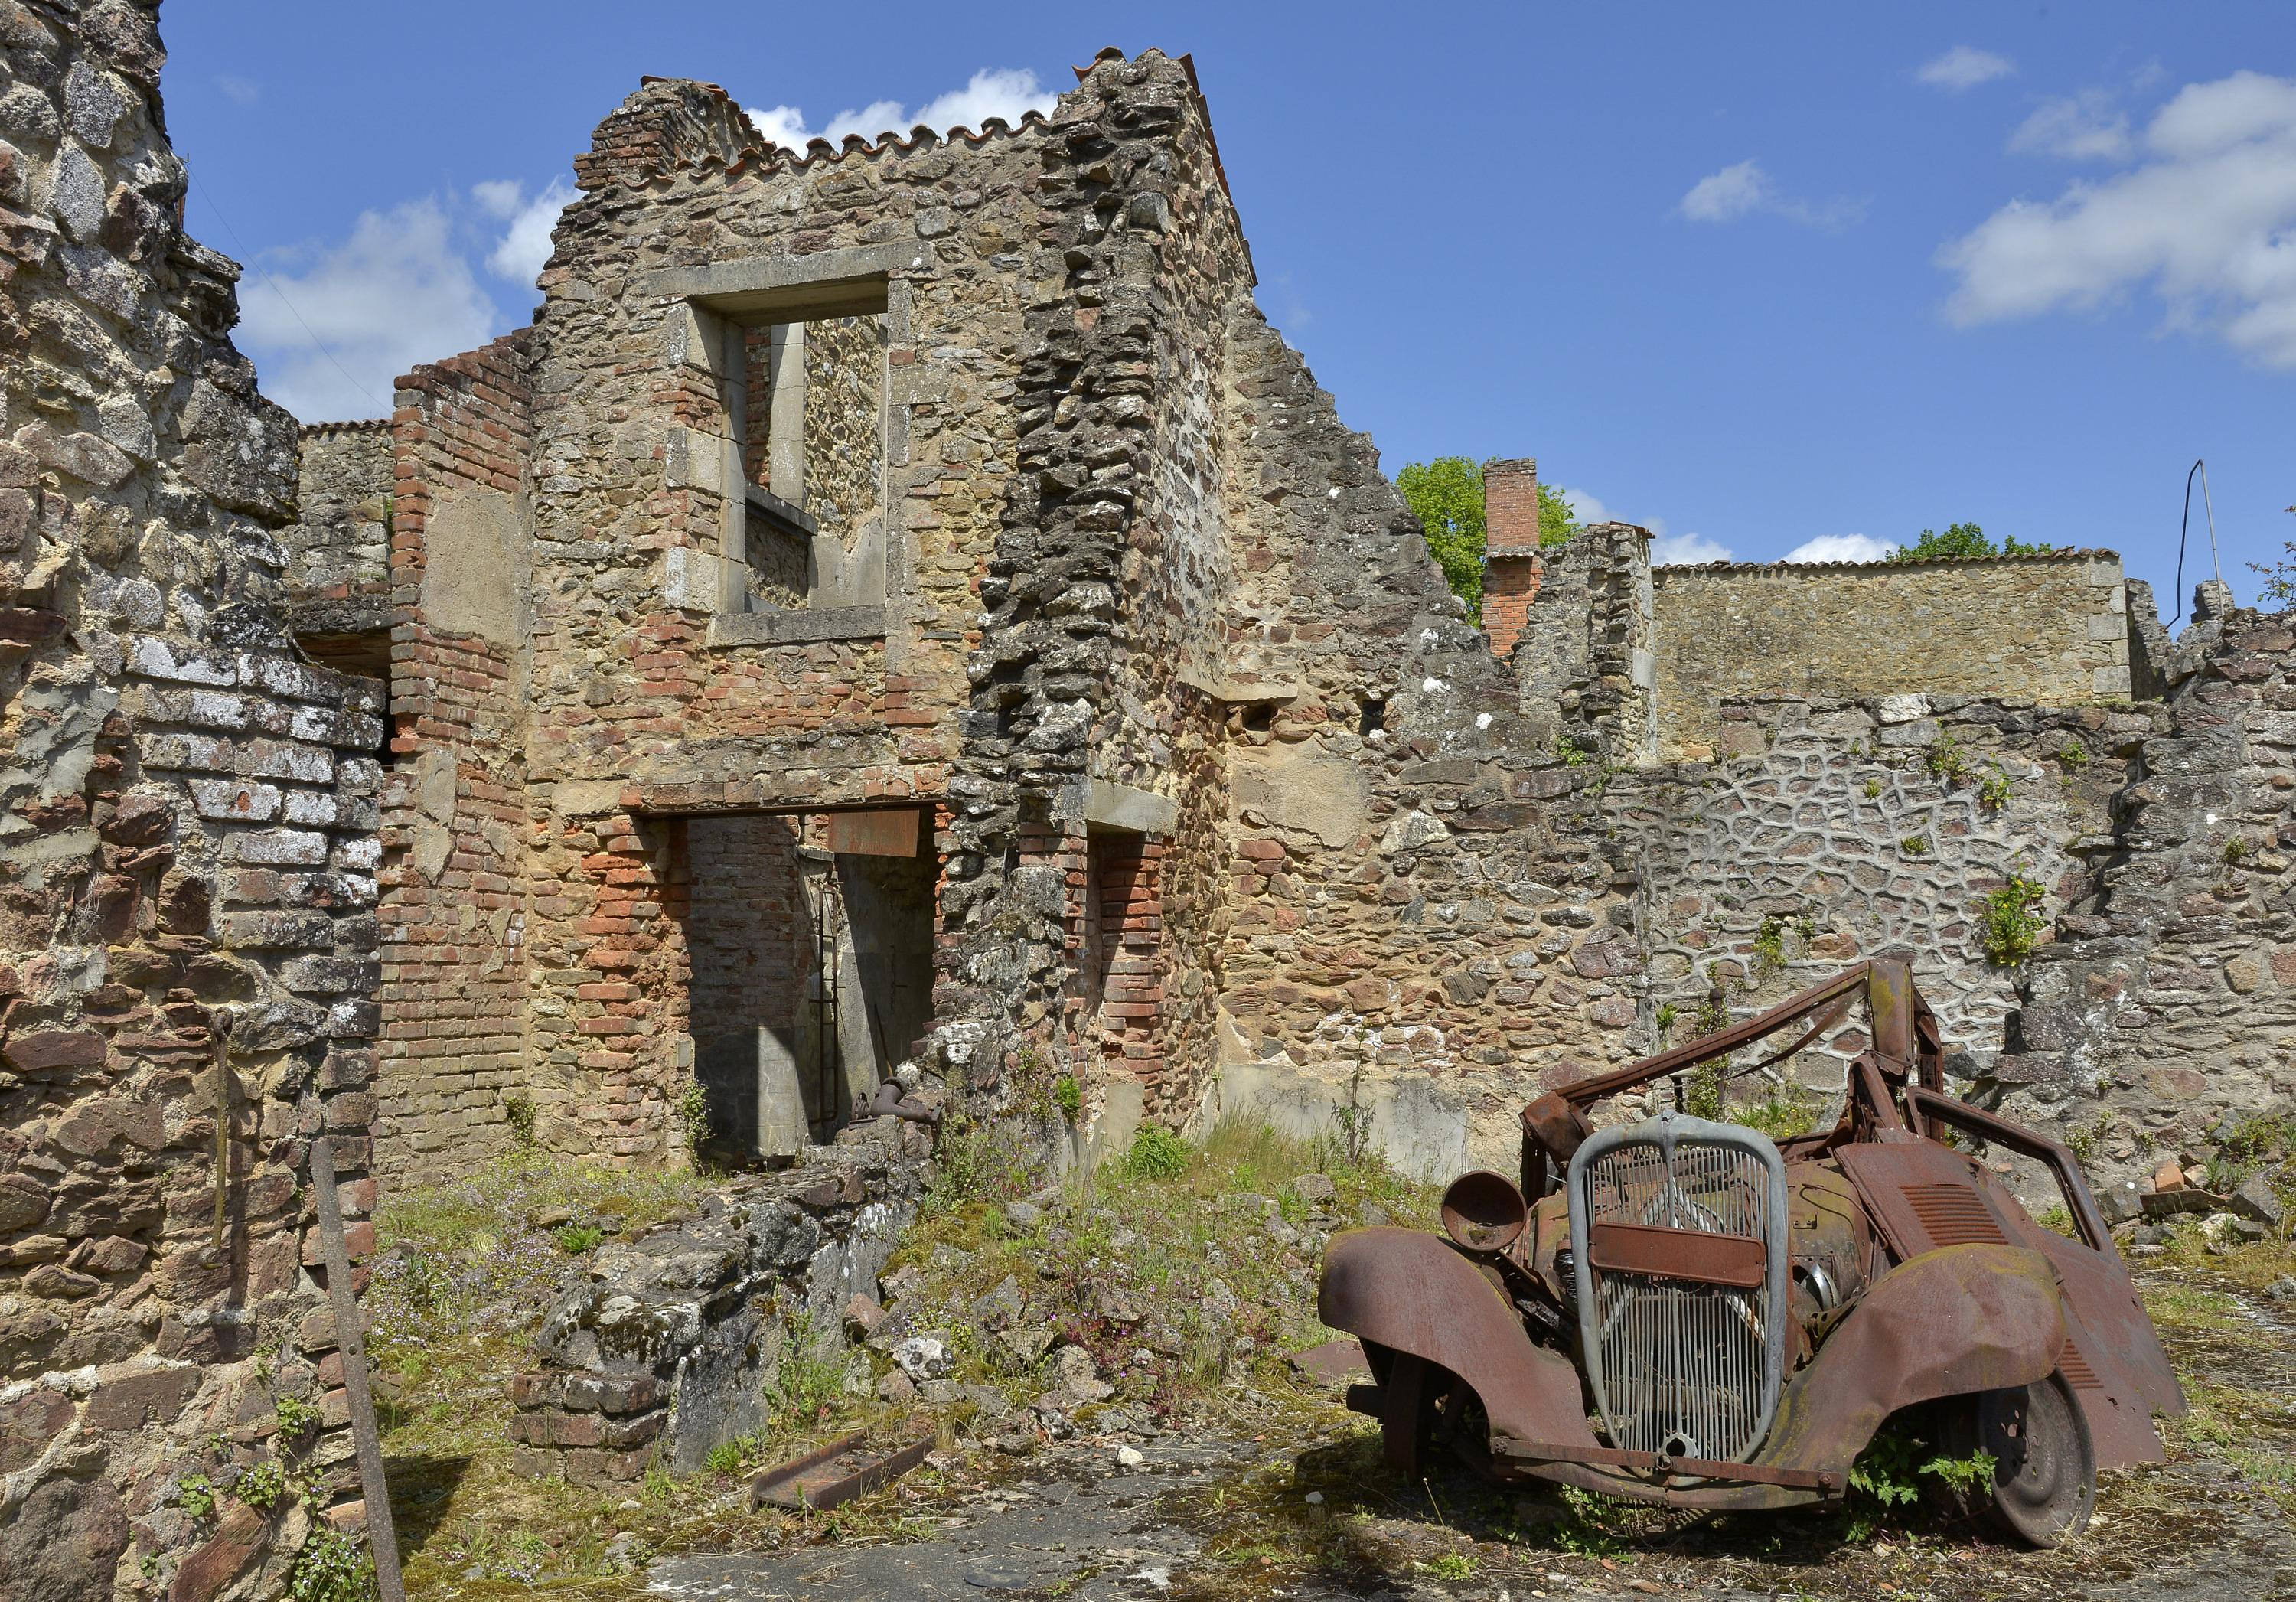 An exceptional donation of 500,000 euros for the village of Oradour-sur-Glane